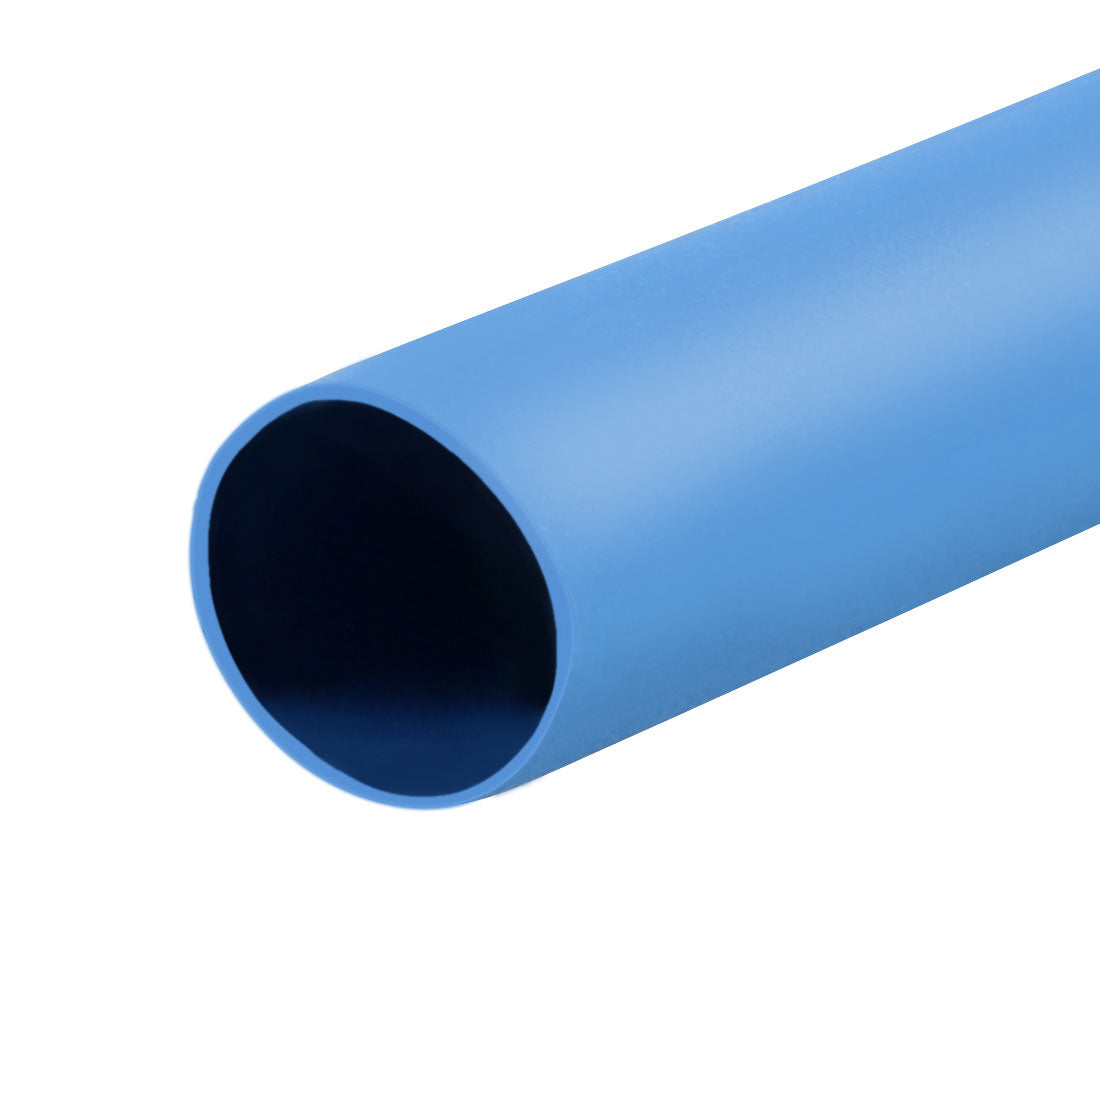 uxcell Uxcell Heat Shrink Tube 2:1 Electrical Insulation Tube Wire Cable Tubing Sleeving Wrap Blue 4.5mm Diameter 1m Long